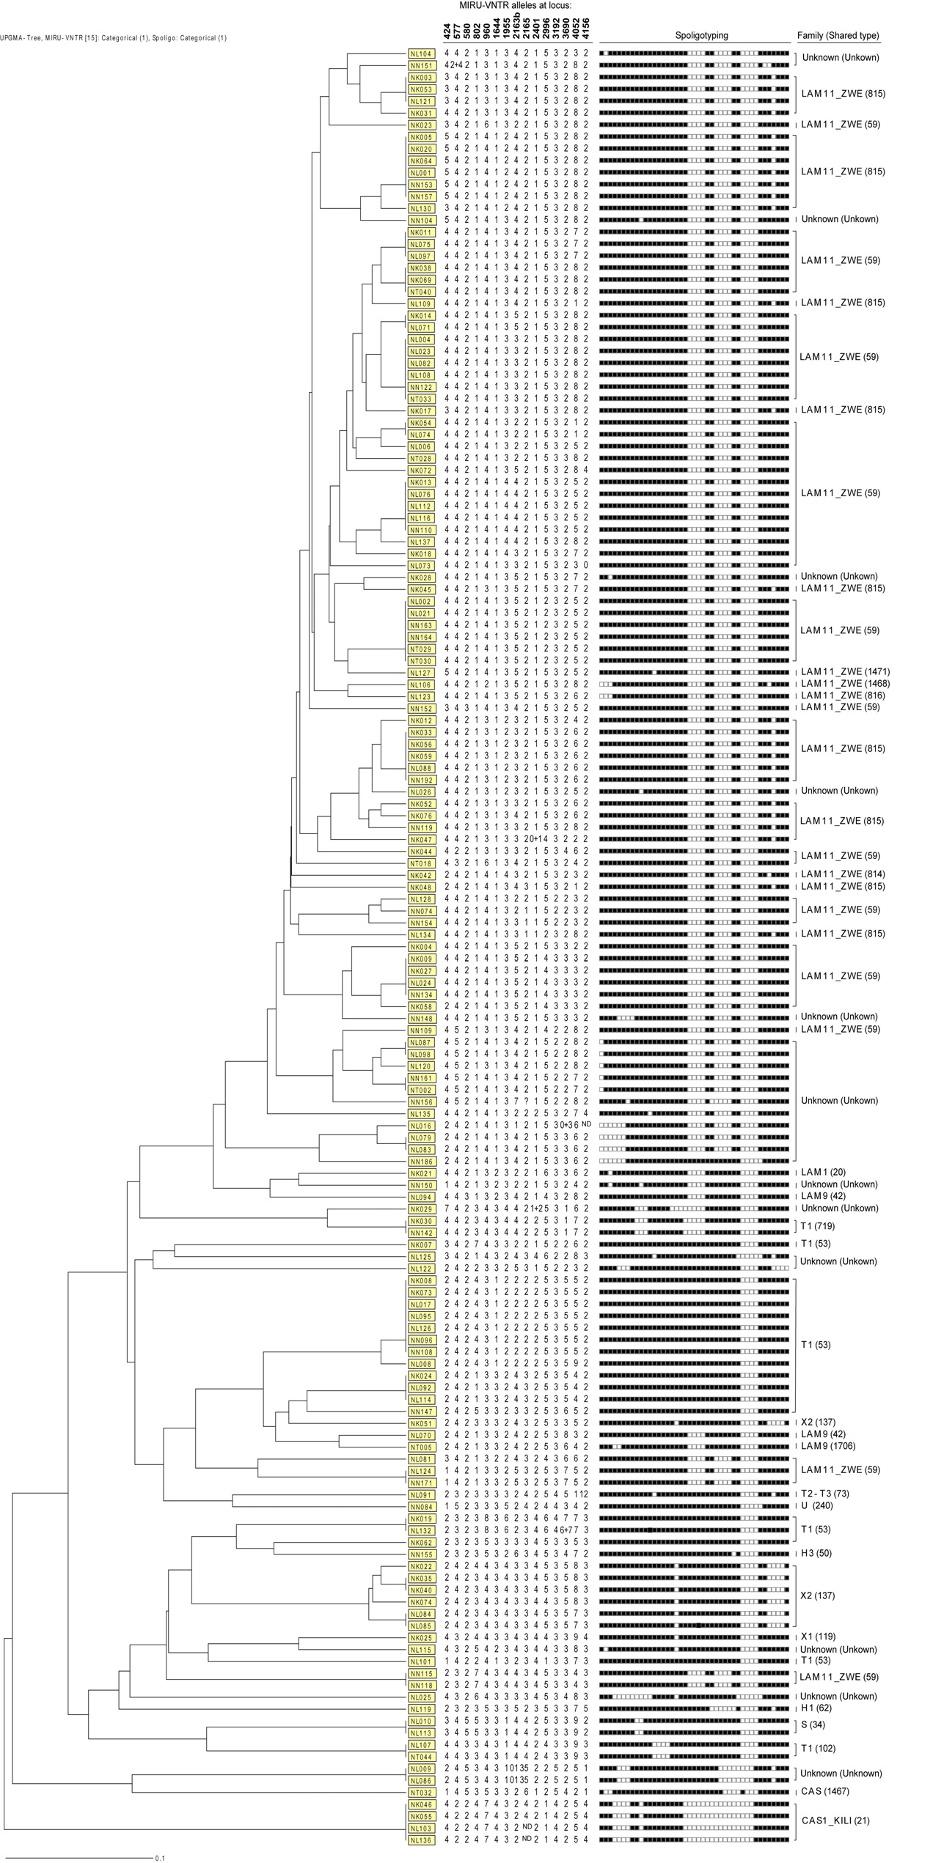 Page 5 of 9 Figure 2 Spoligotyping and MIRU-VNTR clustering of representative M. tuberculosis isolates from Ndola.